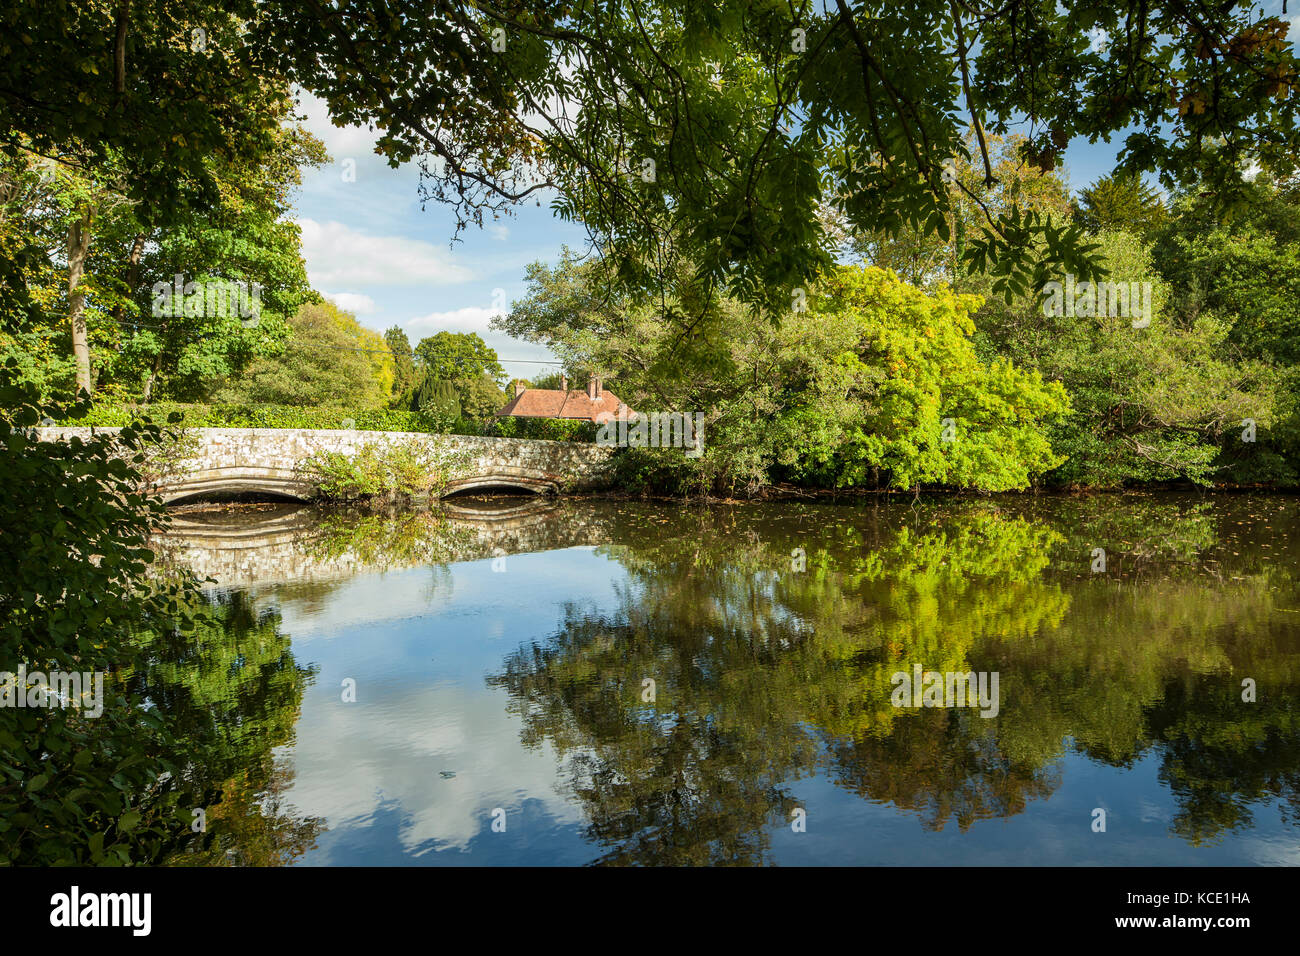 Autumn afternoon on a pond in Chiddingstone village, Kent, England. Stock Photo